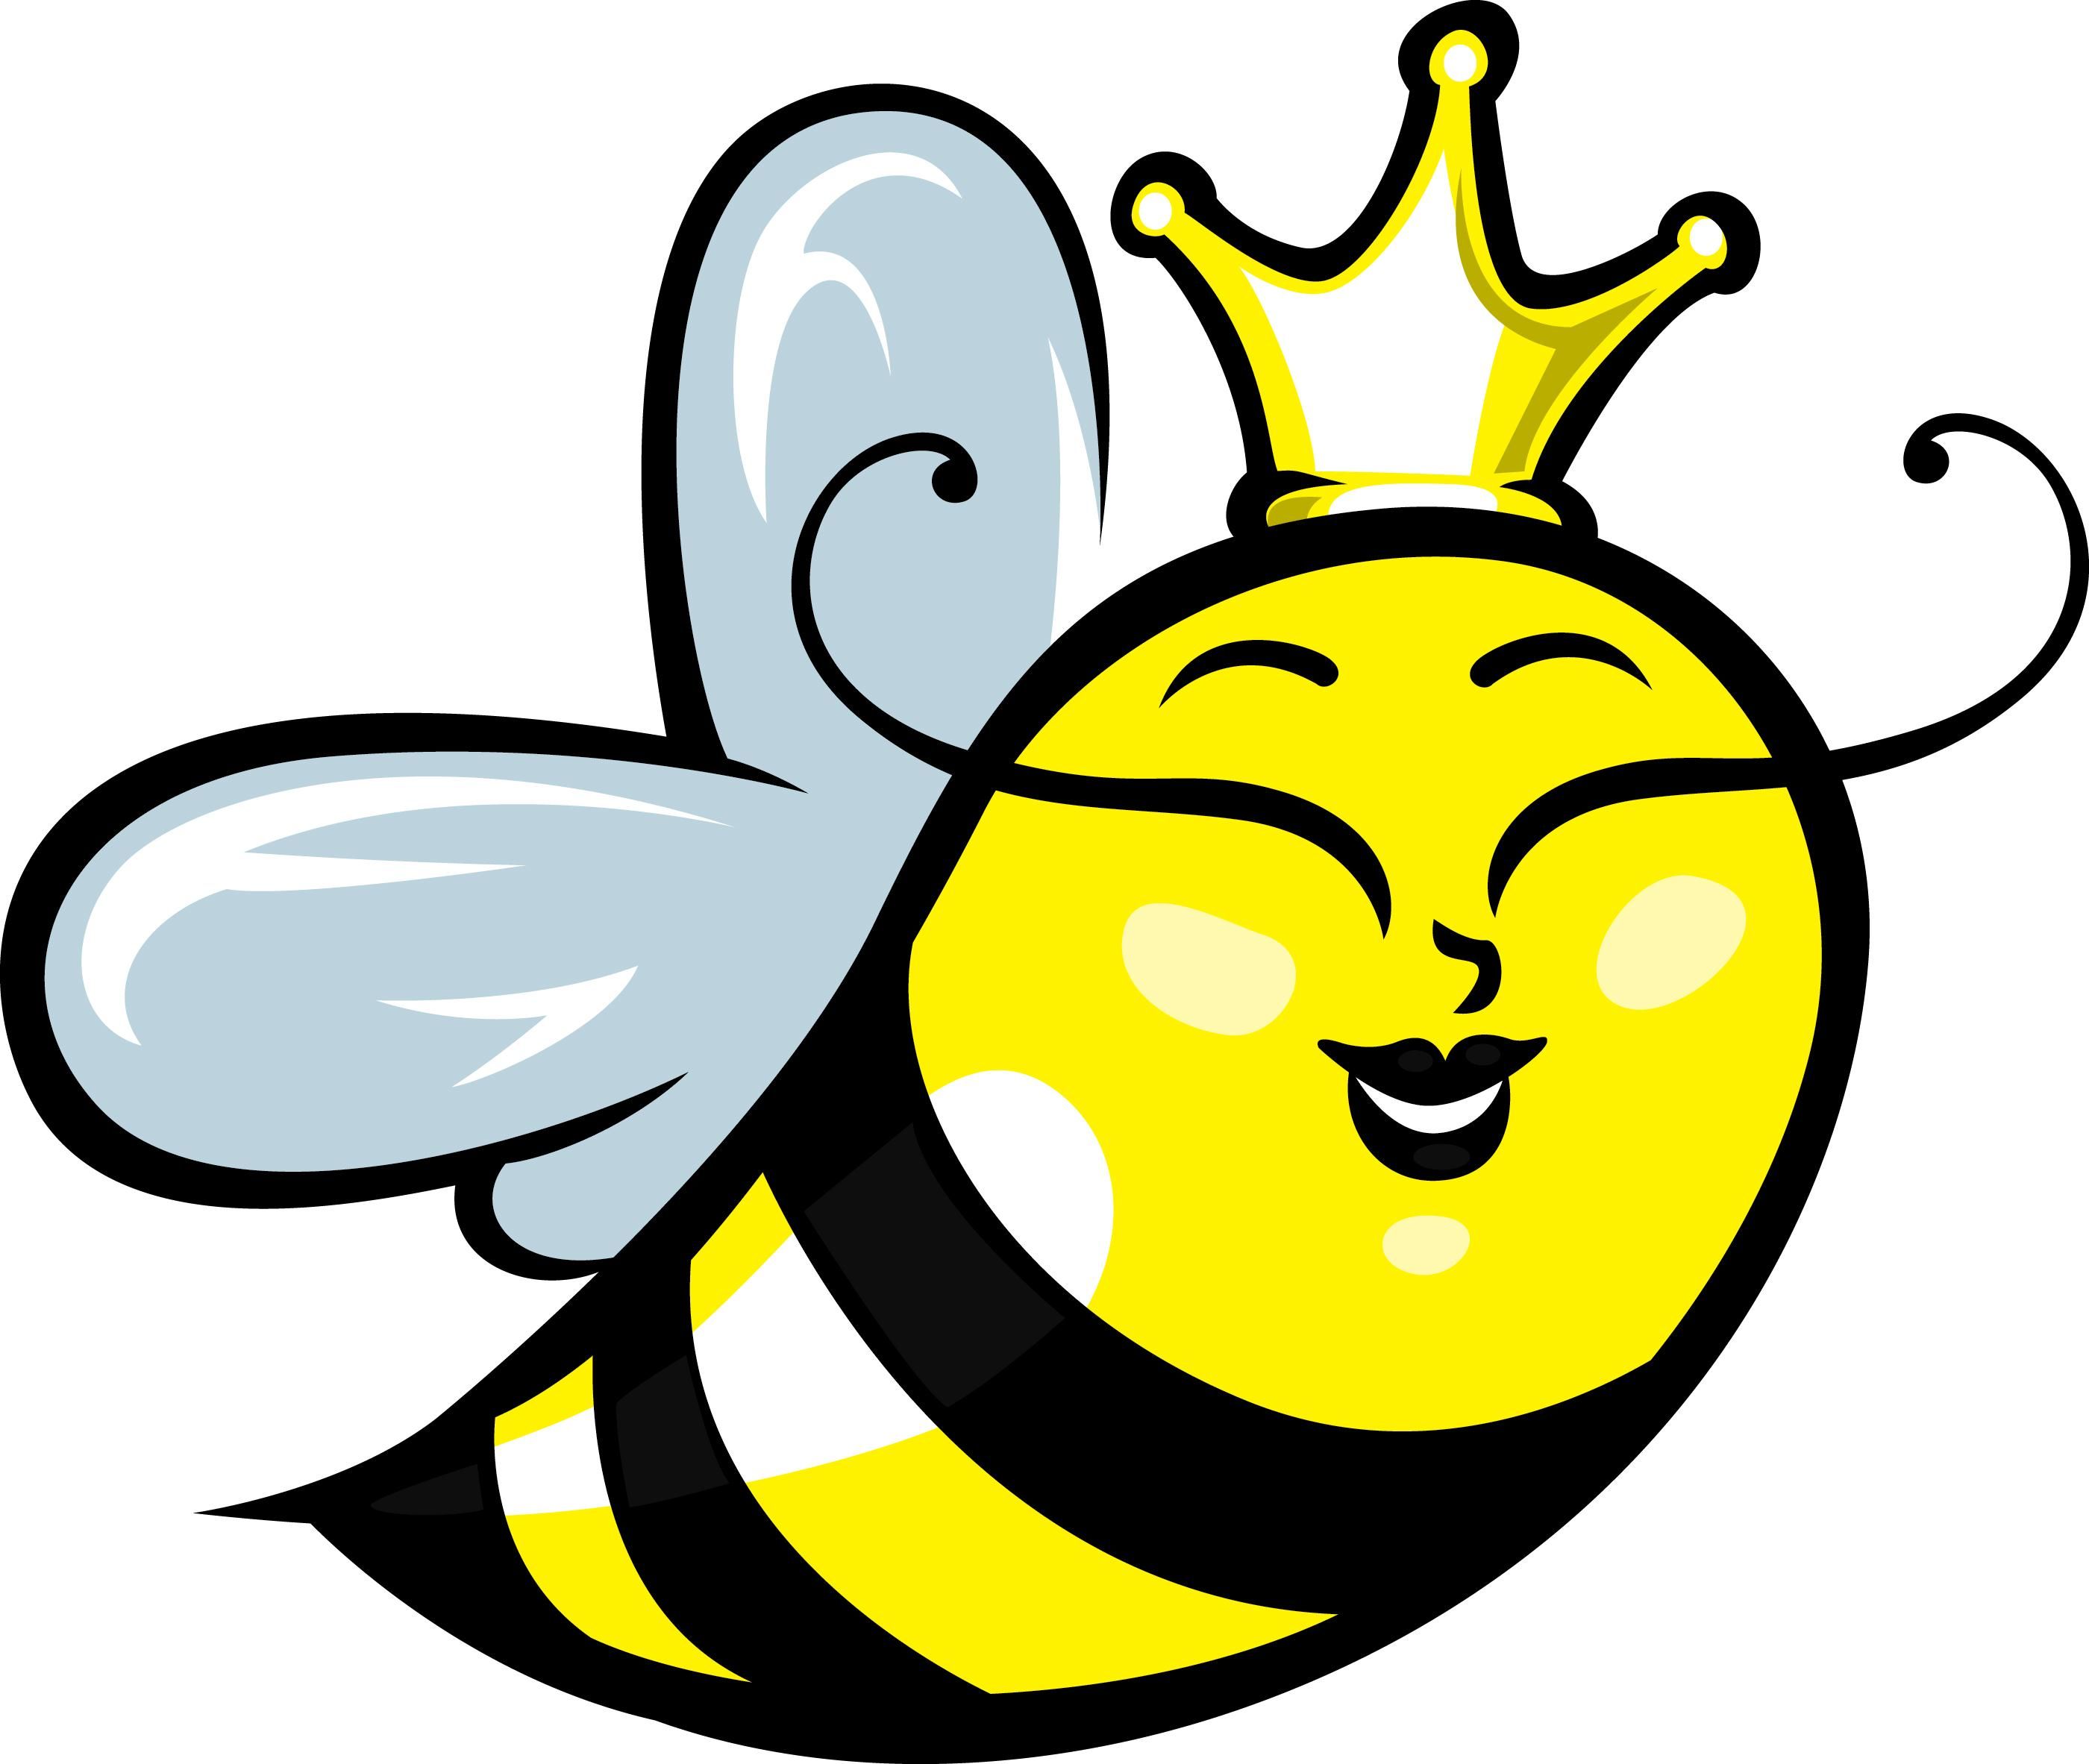 Bees clipart bumble bee. Free all rights the